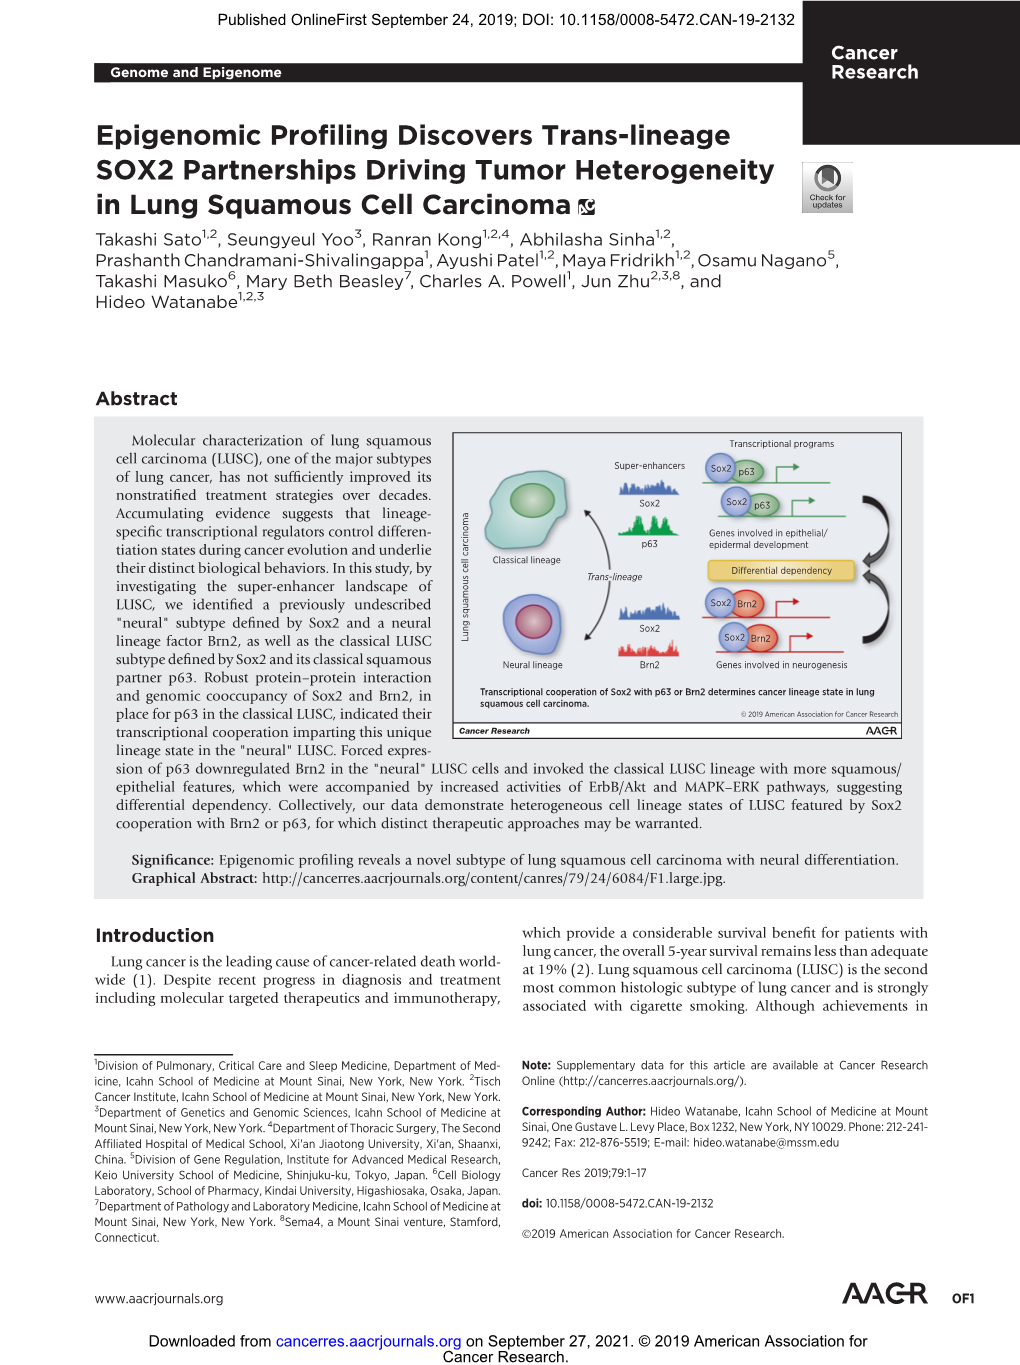 Epigenomic Profiling Discovers Trans-Lineage SOX2 Partnerships Driving Tumor Heterogeneity in Lung Squamous Cell Carcinoma